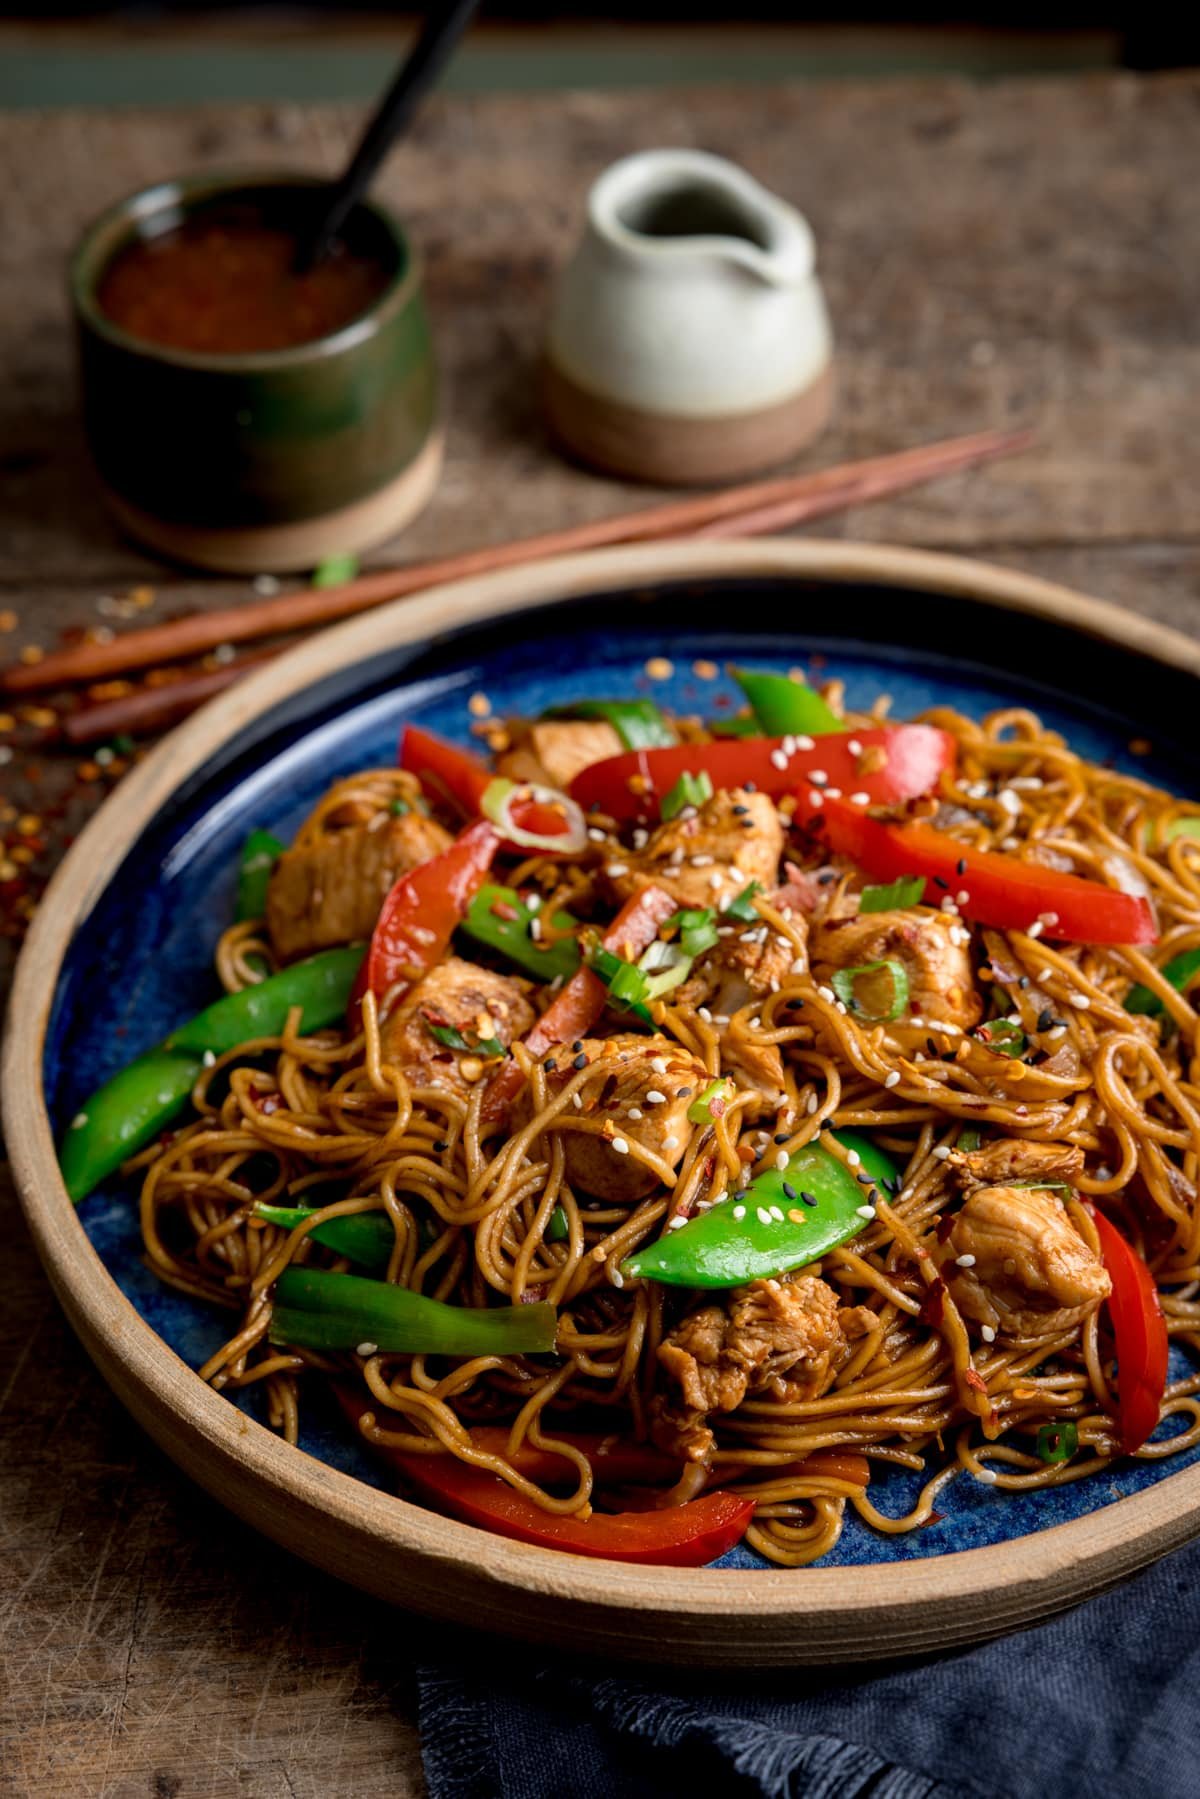 Sideways image of Chicken Lo Mein on a blue plate on a wooden table.  At the top of the picture is a pot of sweet chili sauce with a spoon sticking out, a small jar of soy sauce, and some chopsticks.